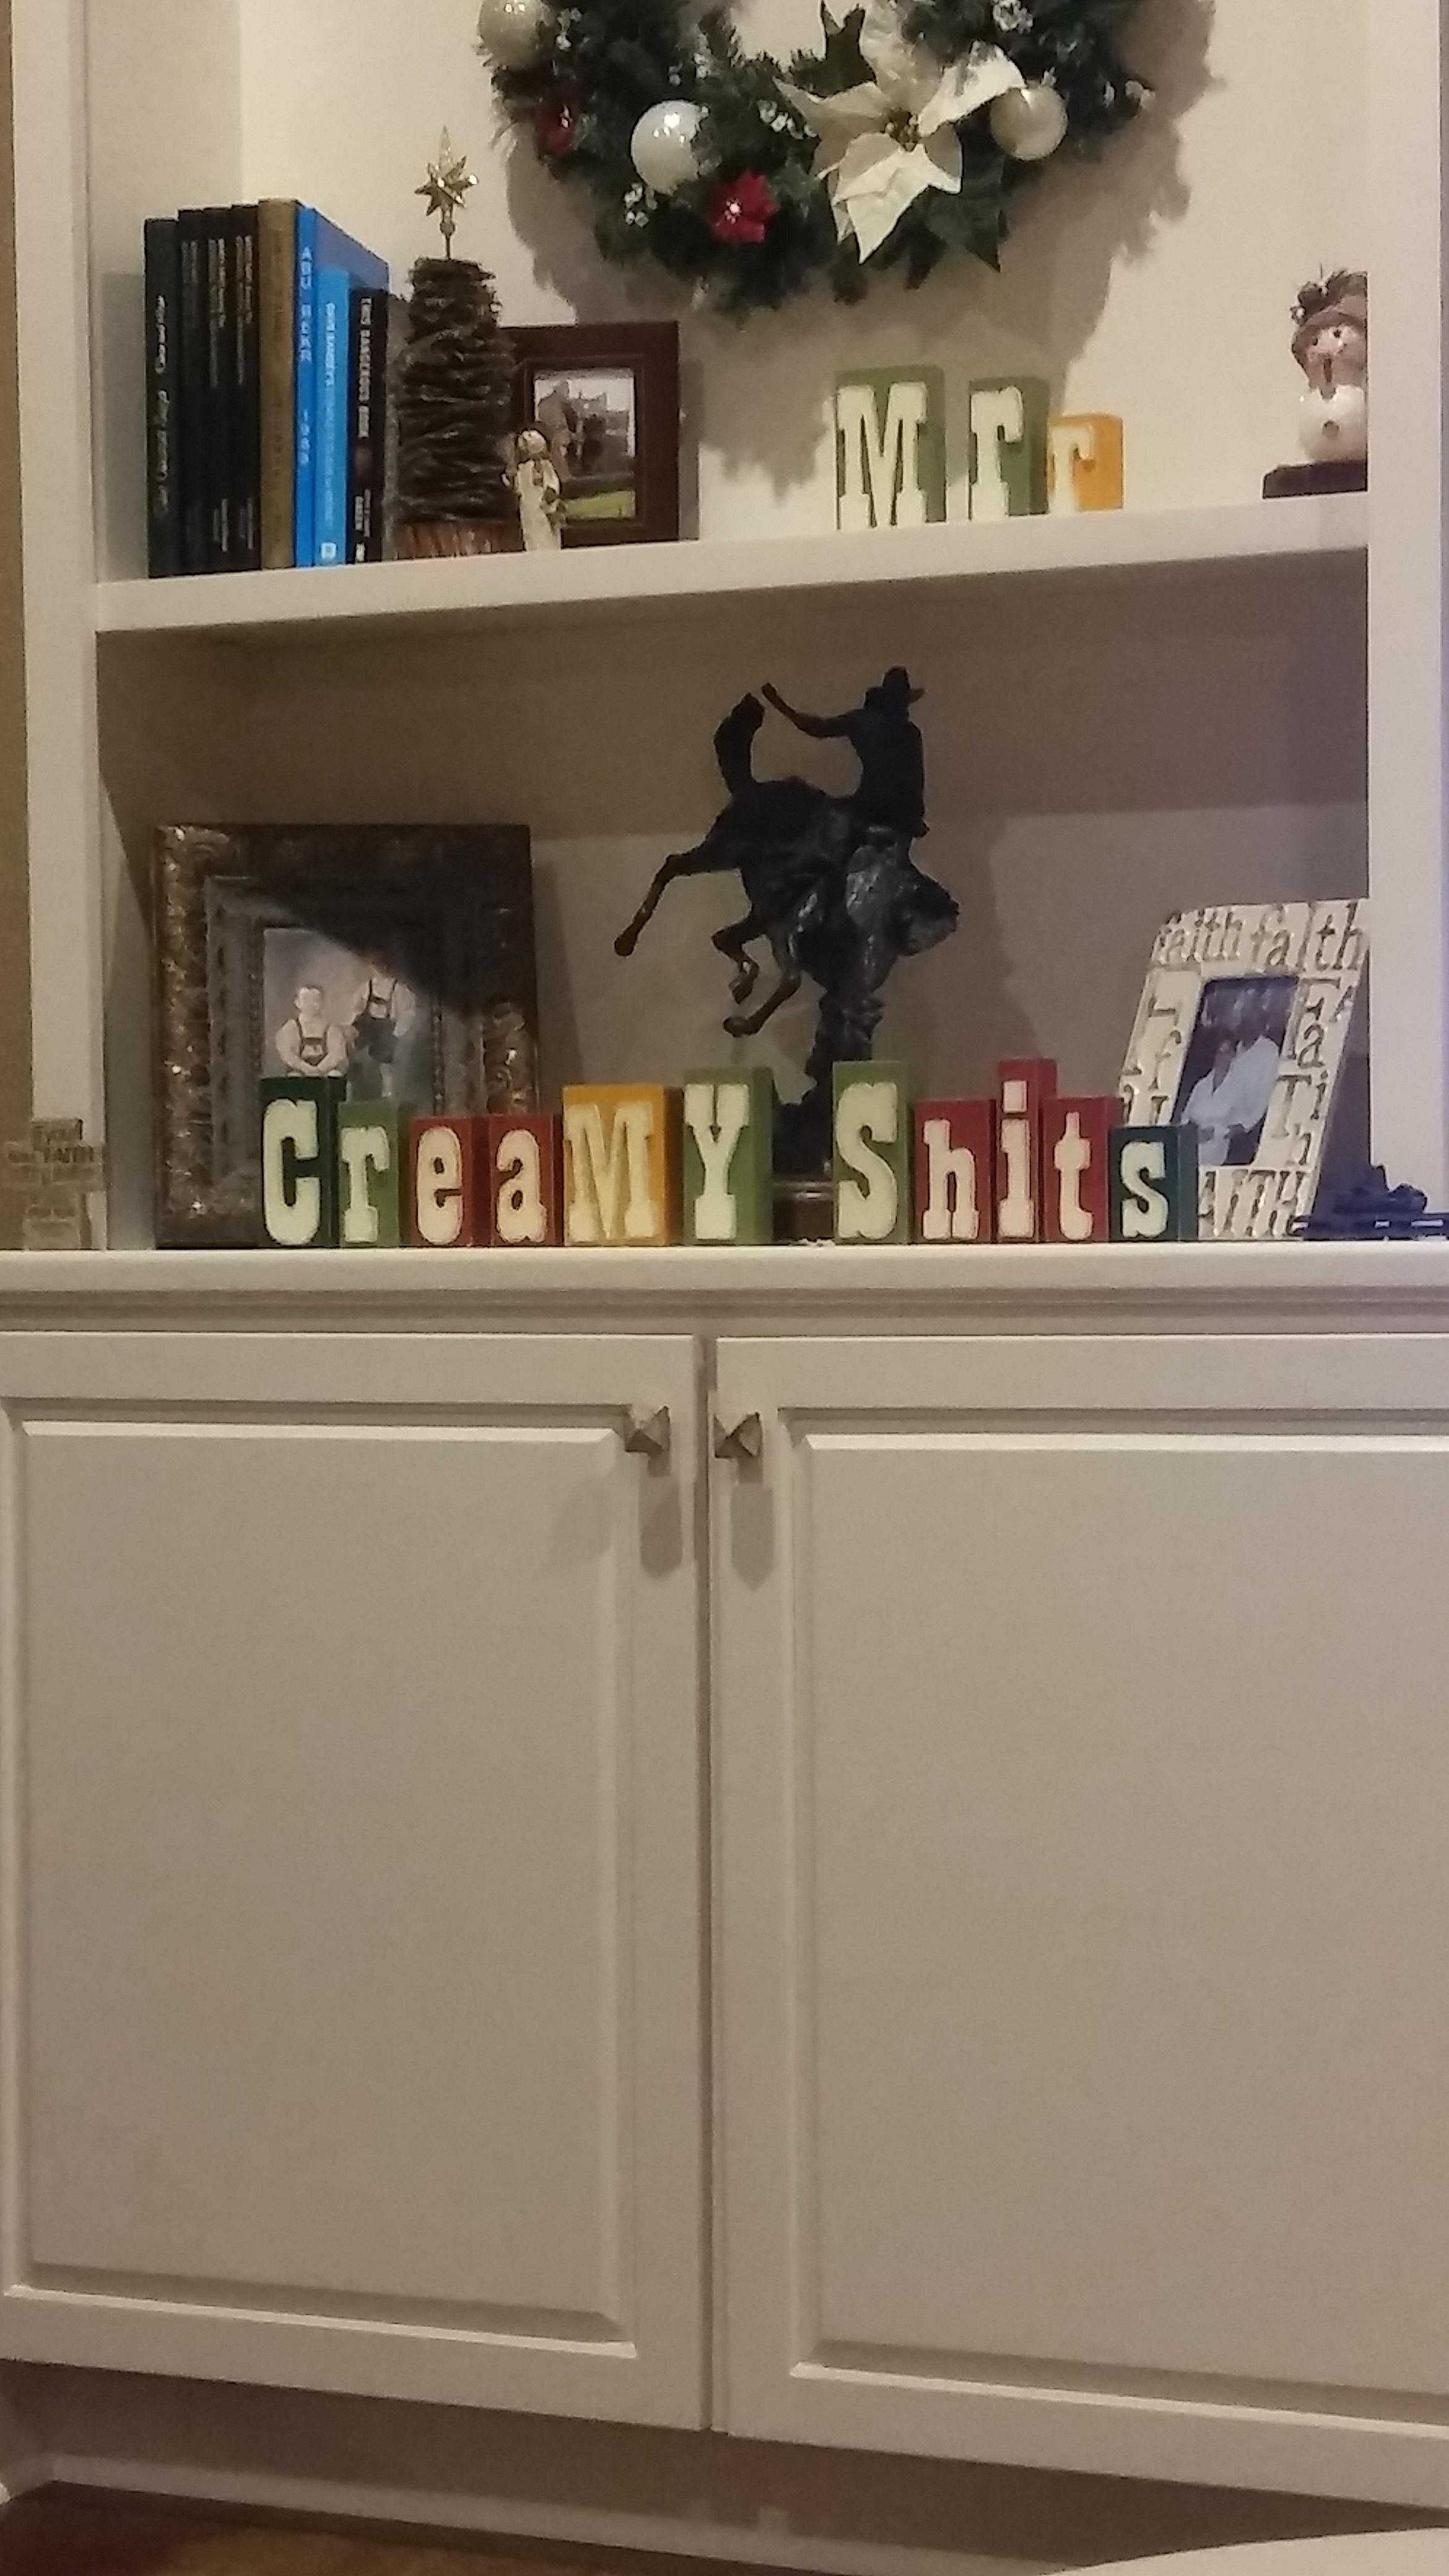 Made an anagram out of my mom's "Merry Christmas" blocks